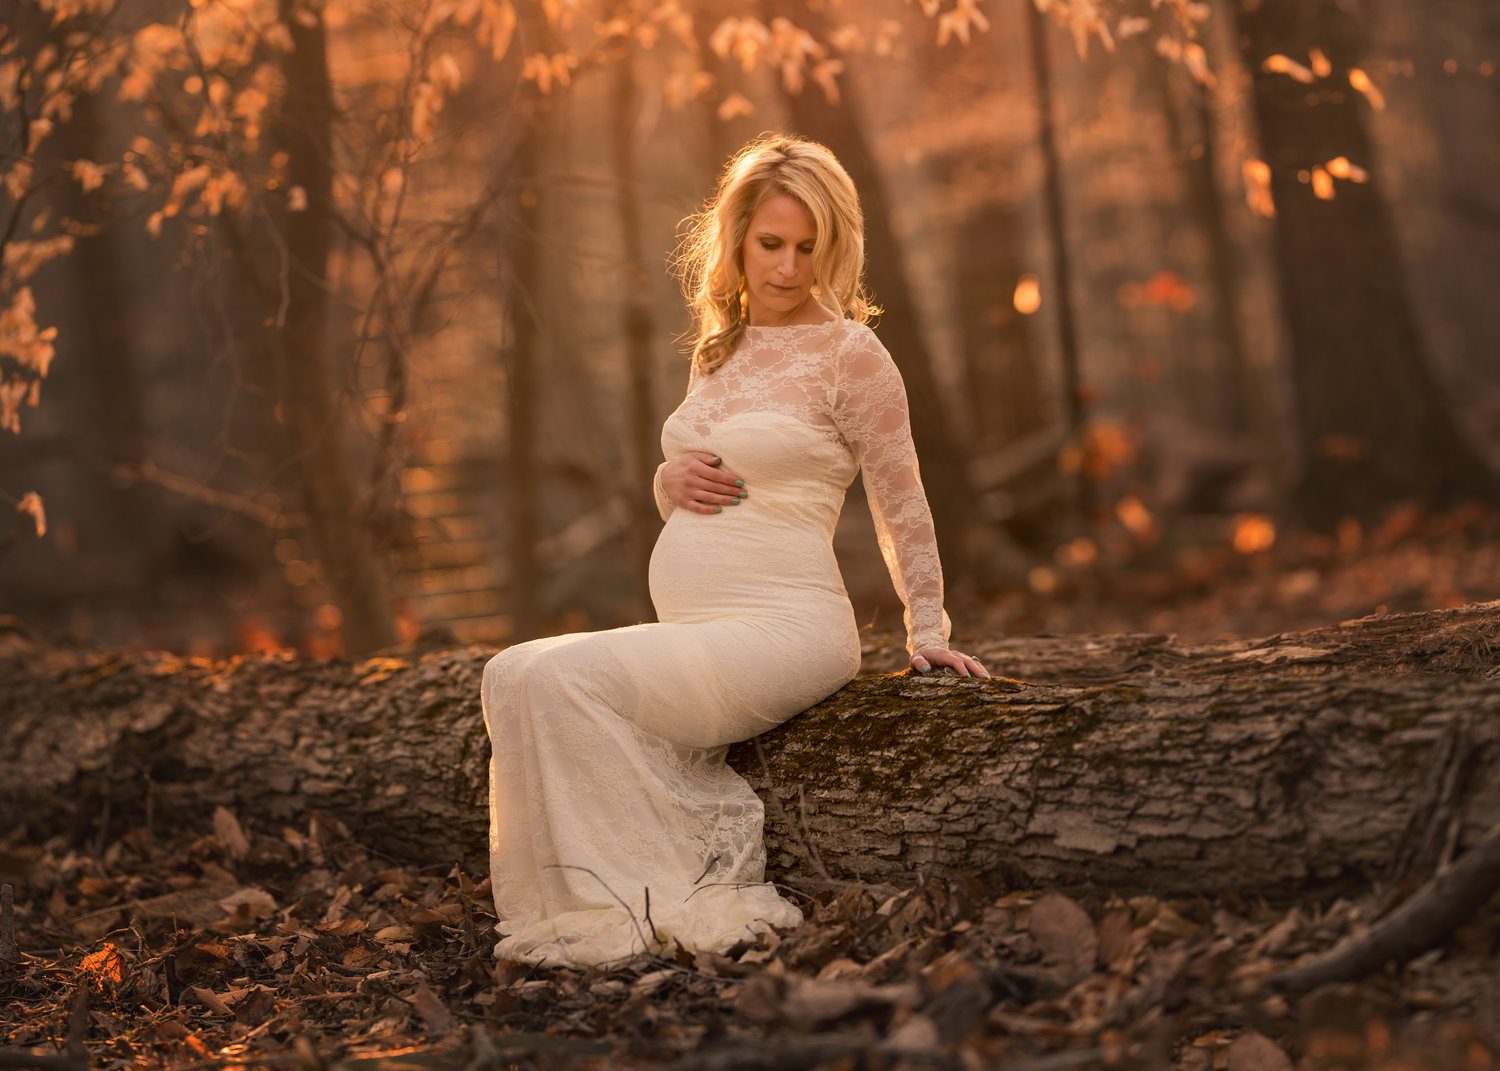 Golden hour maternity photo shoot by Maria from Maria Angeles photography